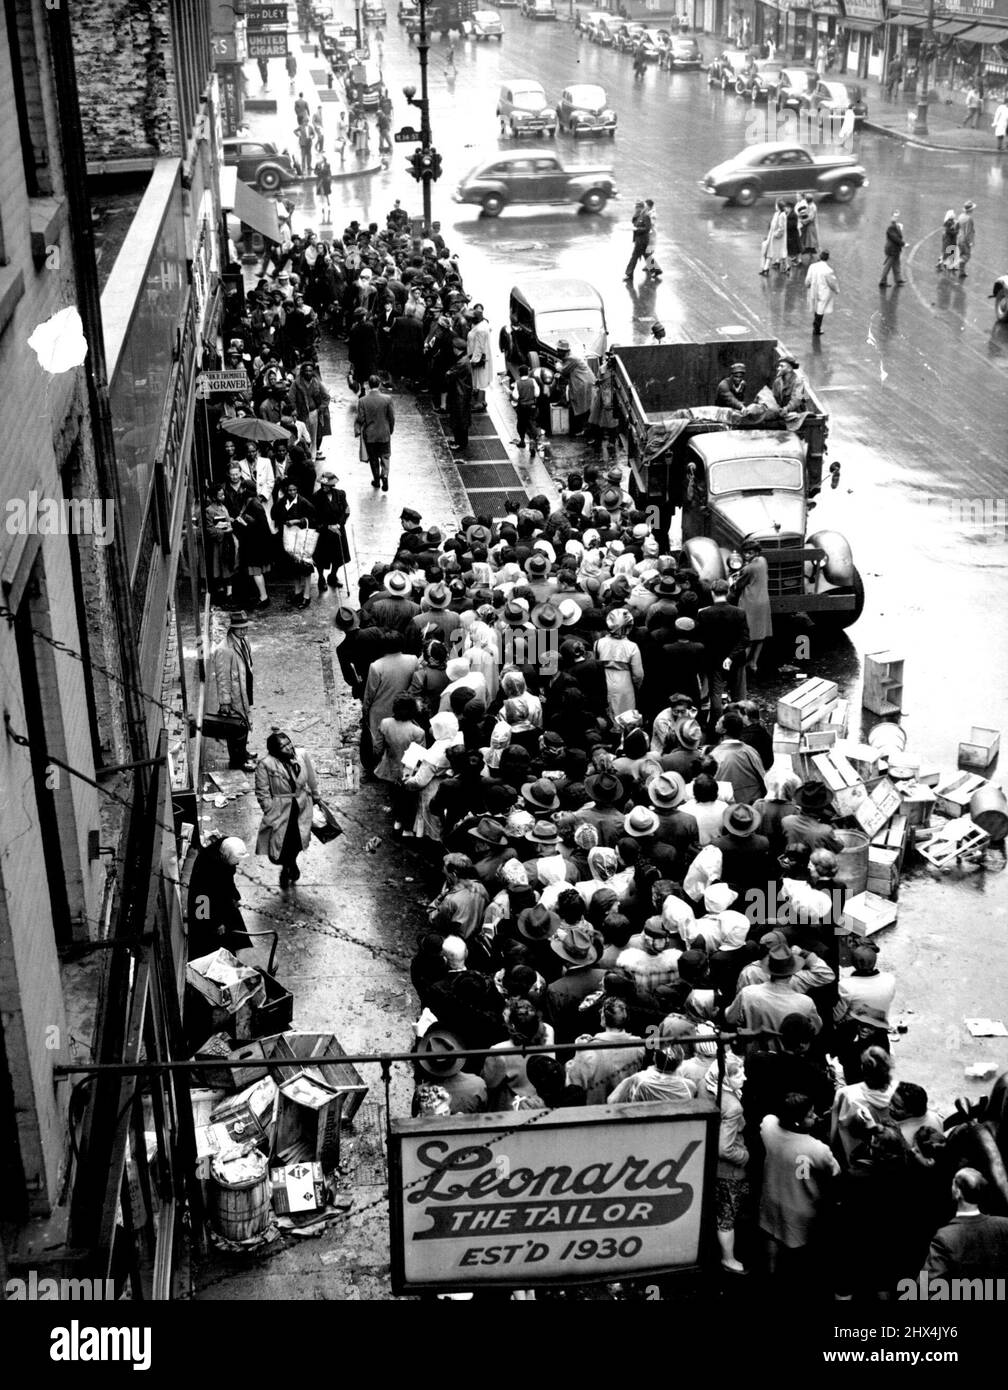 Form in Rain for Chance at Meat - Filling almost the entire width of the sidewalk in front of several stores on Sixth Avenue, between 13th and 14th Streets, these prospective customers wait in the rain for their chance to purchase meat at one of the few New York stores where it is available Oct. 12. Some persons formed the line's beginning at 9 p.m. Oct.11 on the rumor that meat would be places on sale at store opening Oct. 12. October 12, 1946. (Photo by Associated Press Photo). Stock Photo